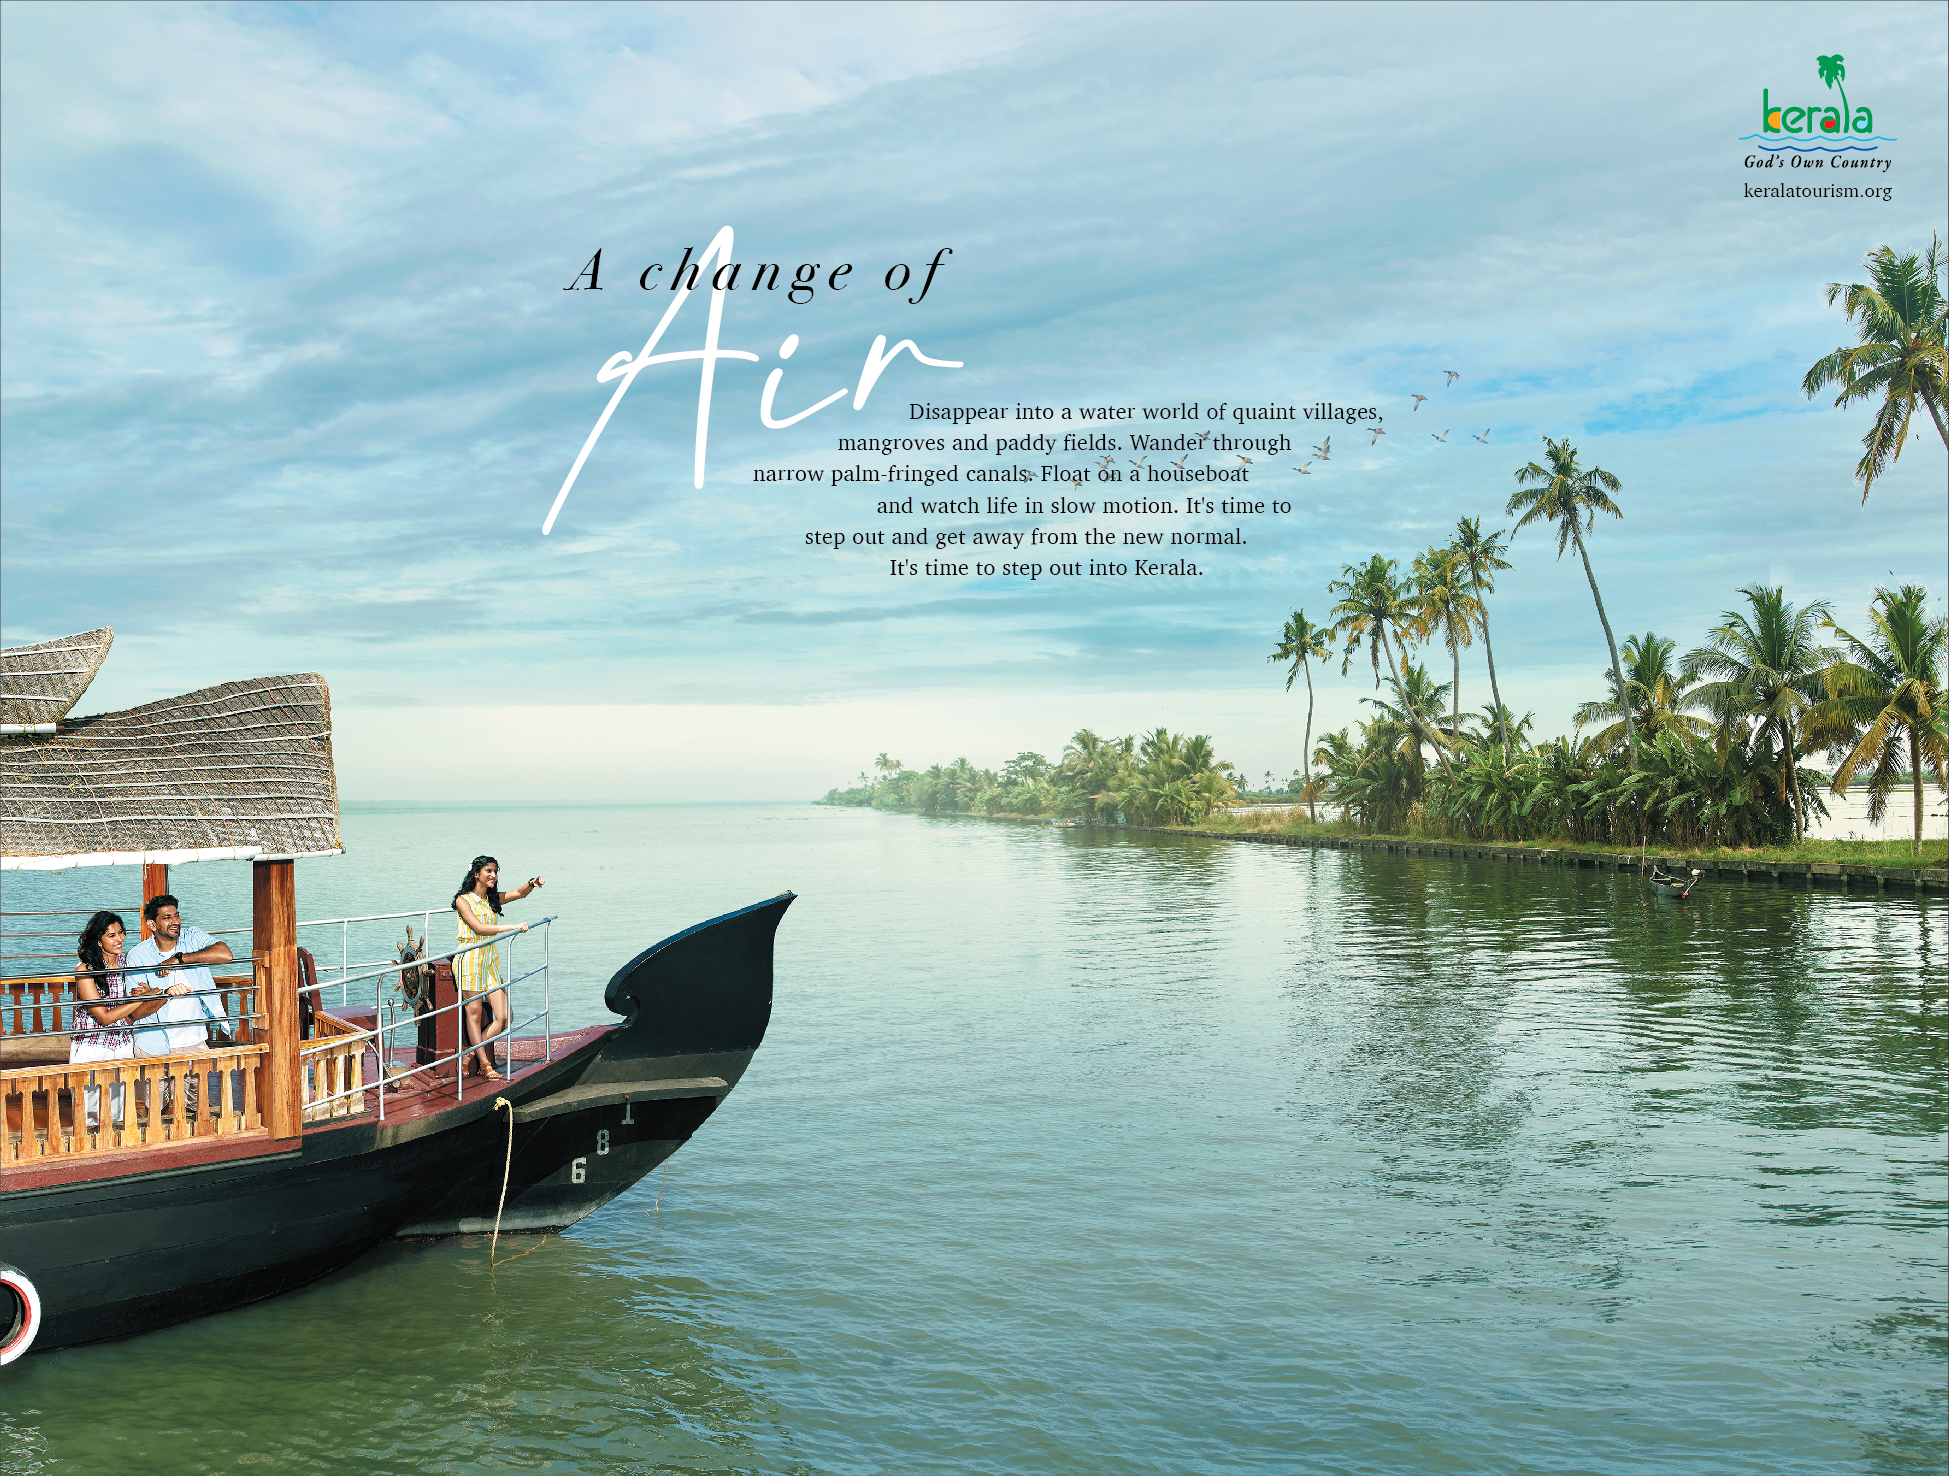 A Change of Air 4 - Post Covid promotion by Kerala Tourism